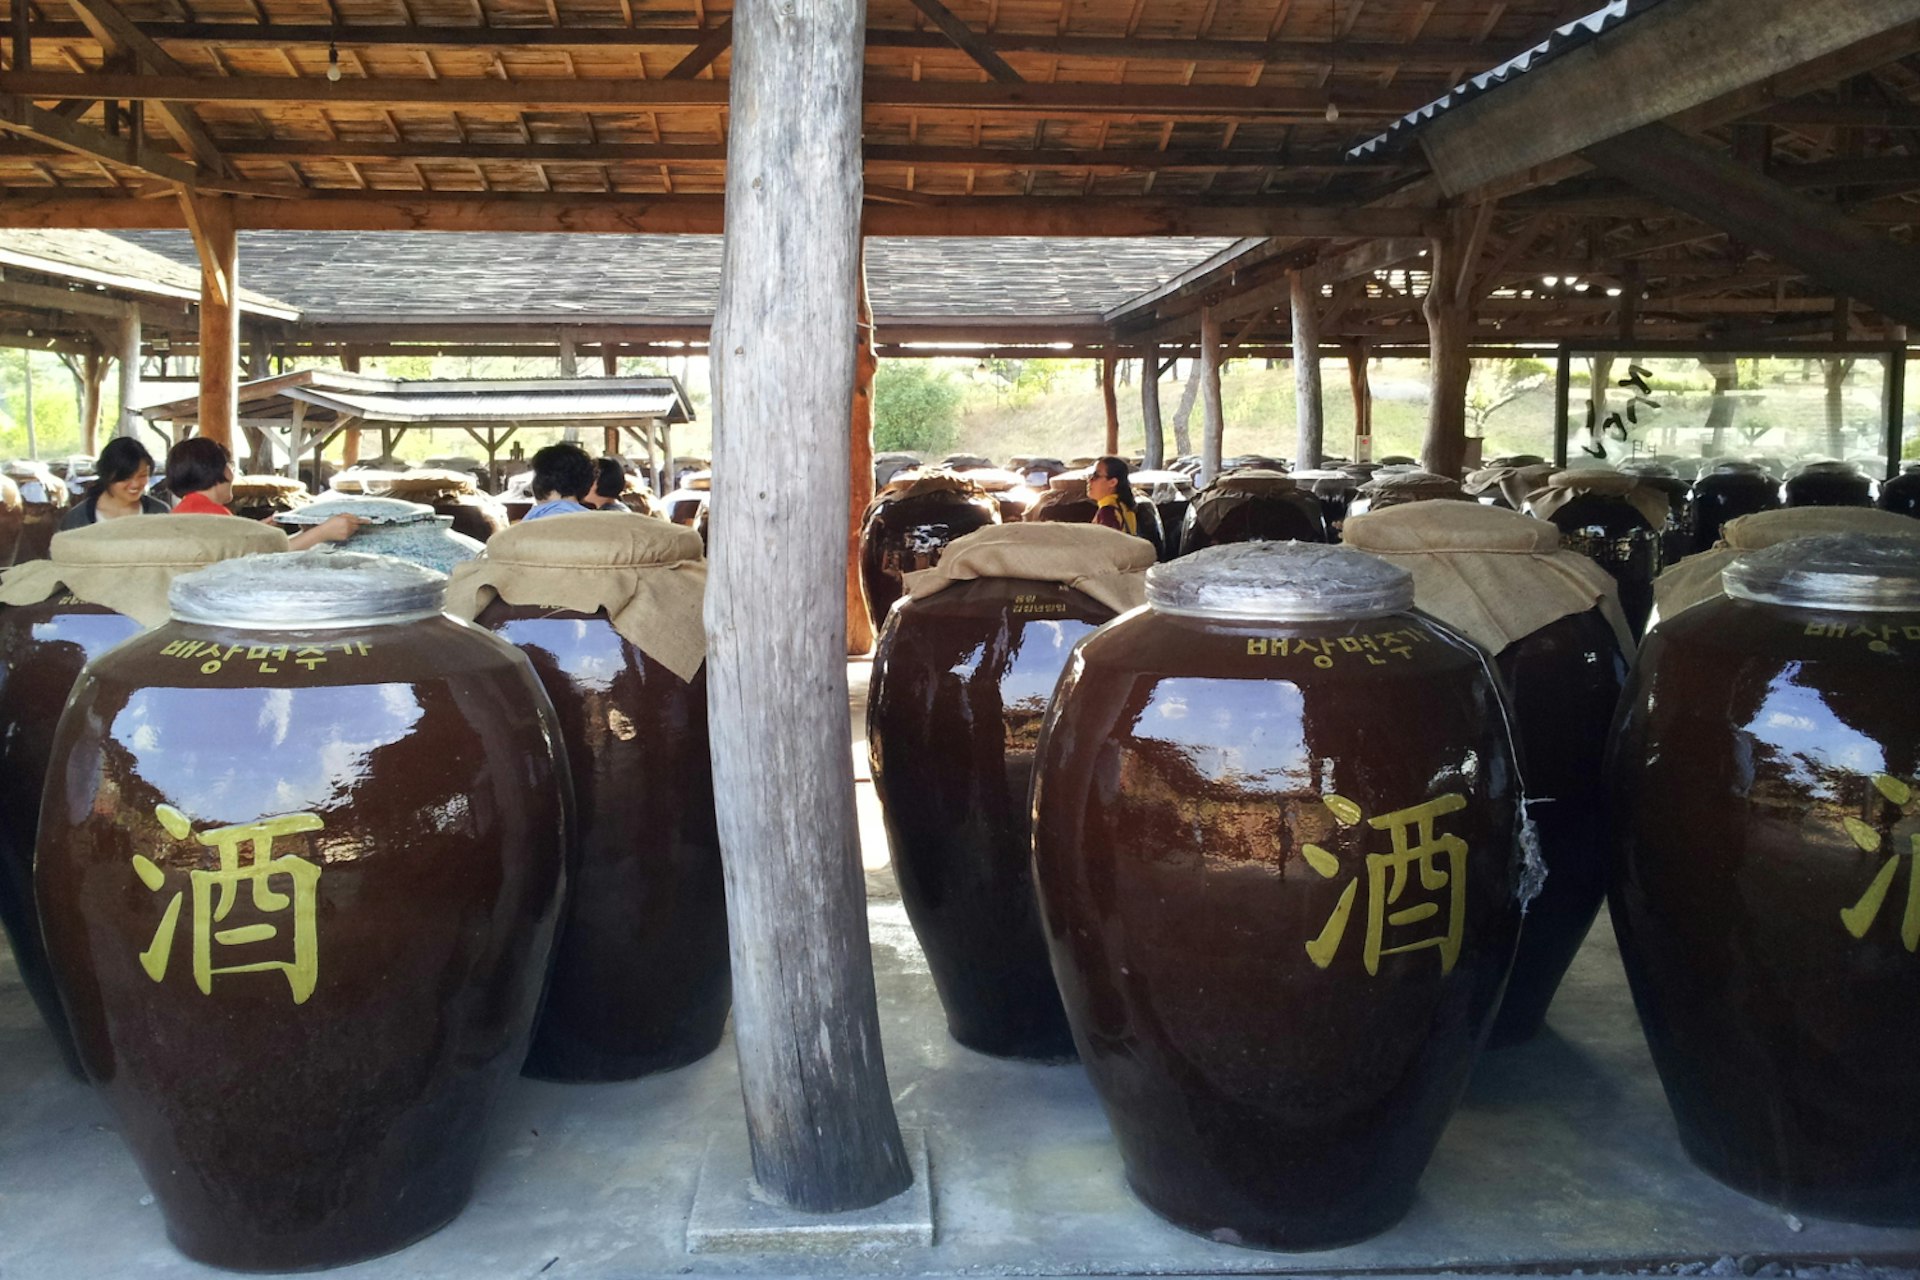 Vats of fermenting soju at Sansawon Brewery. Image by Trent Holden / Lonely Planet